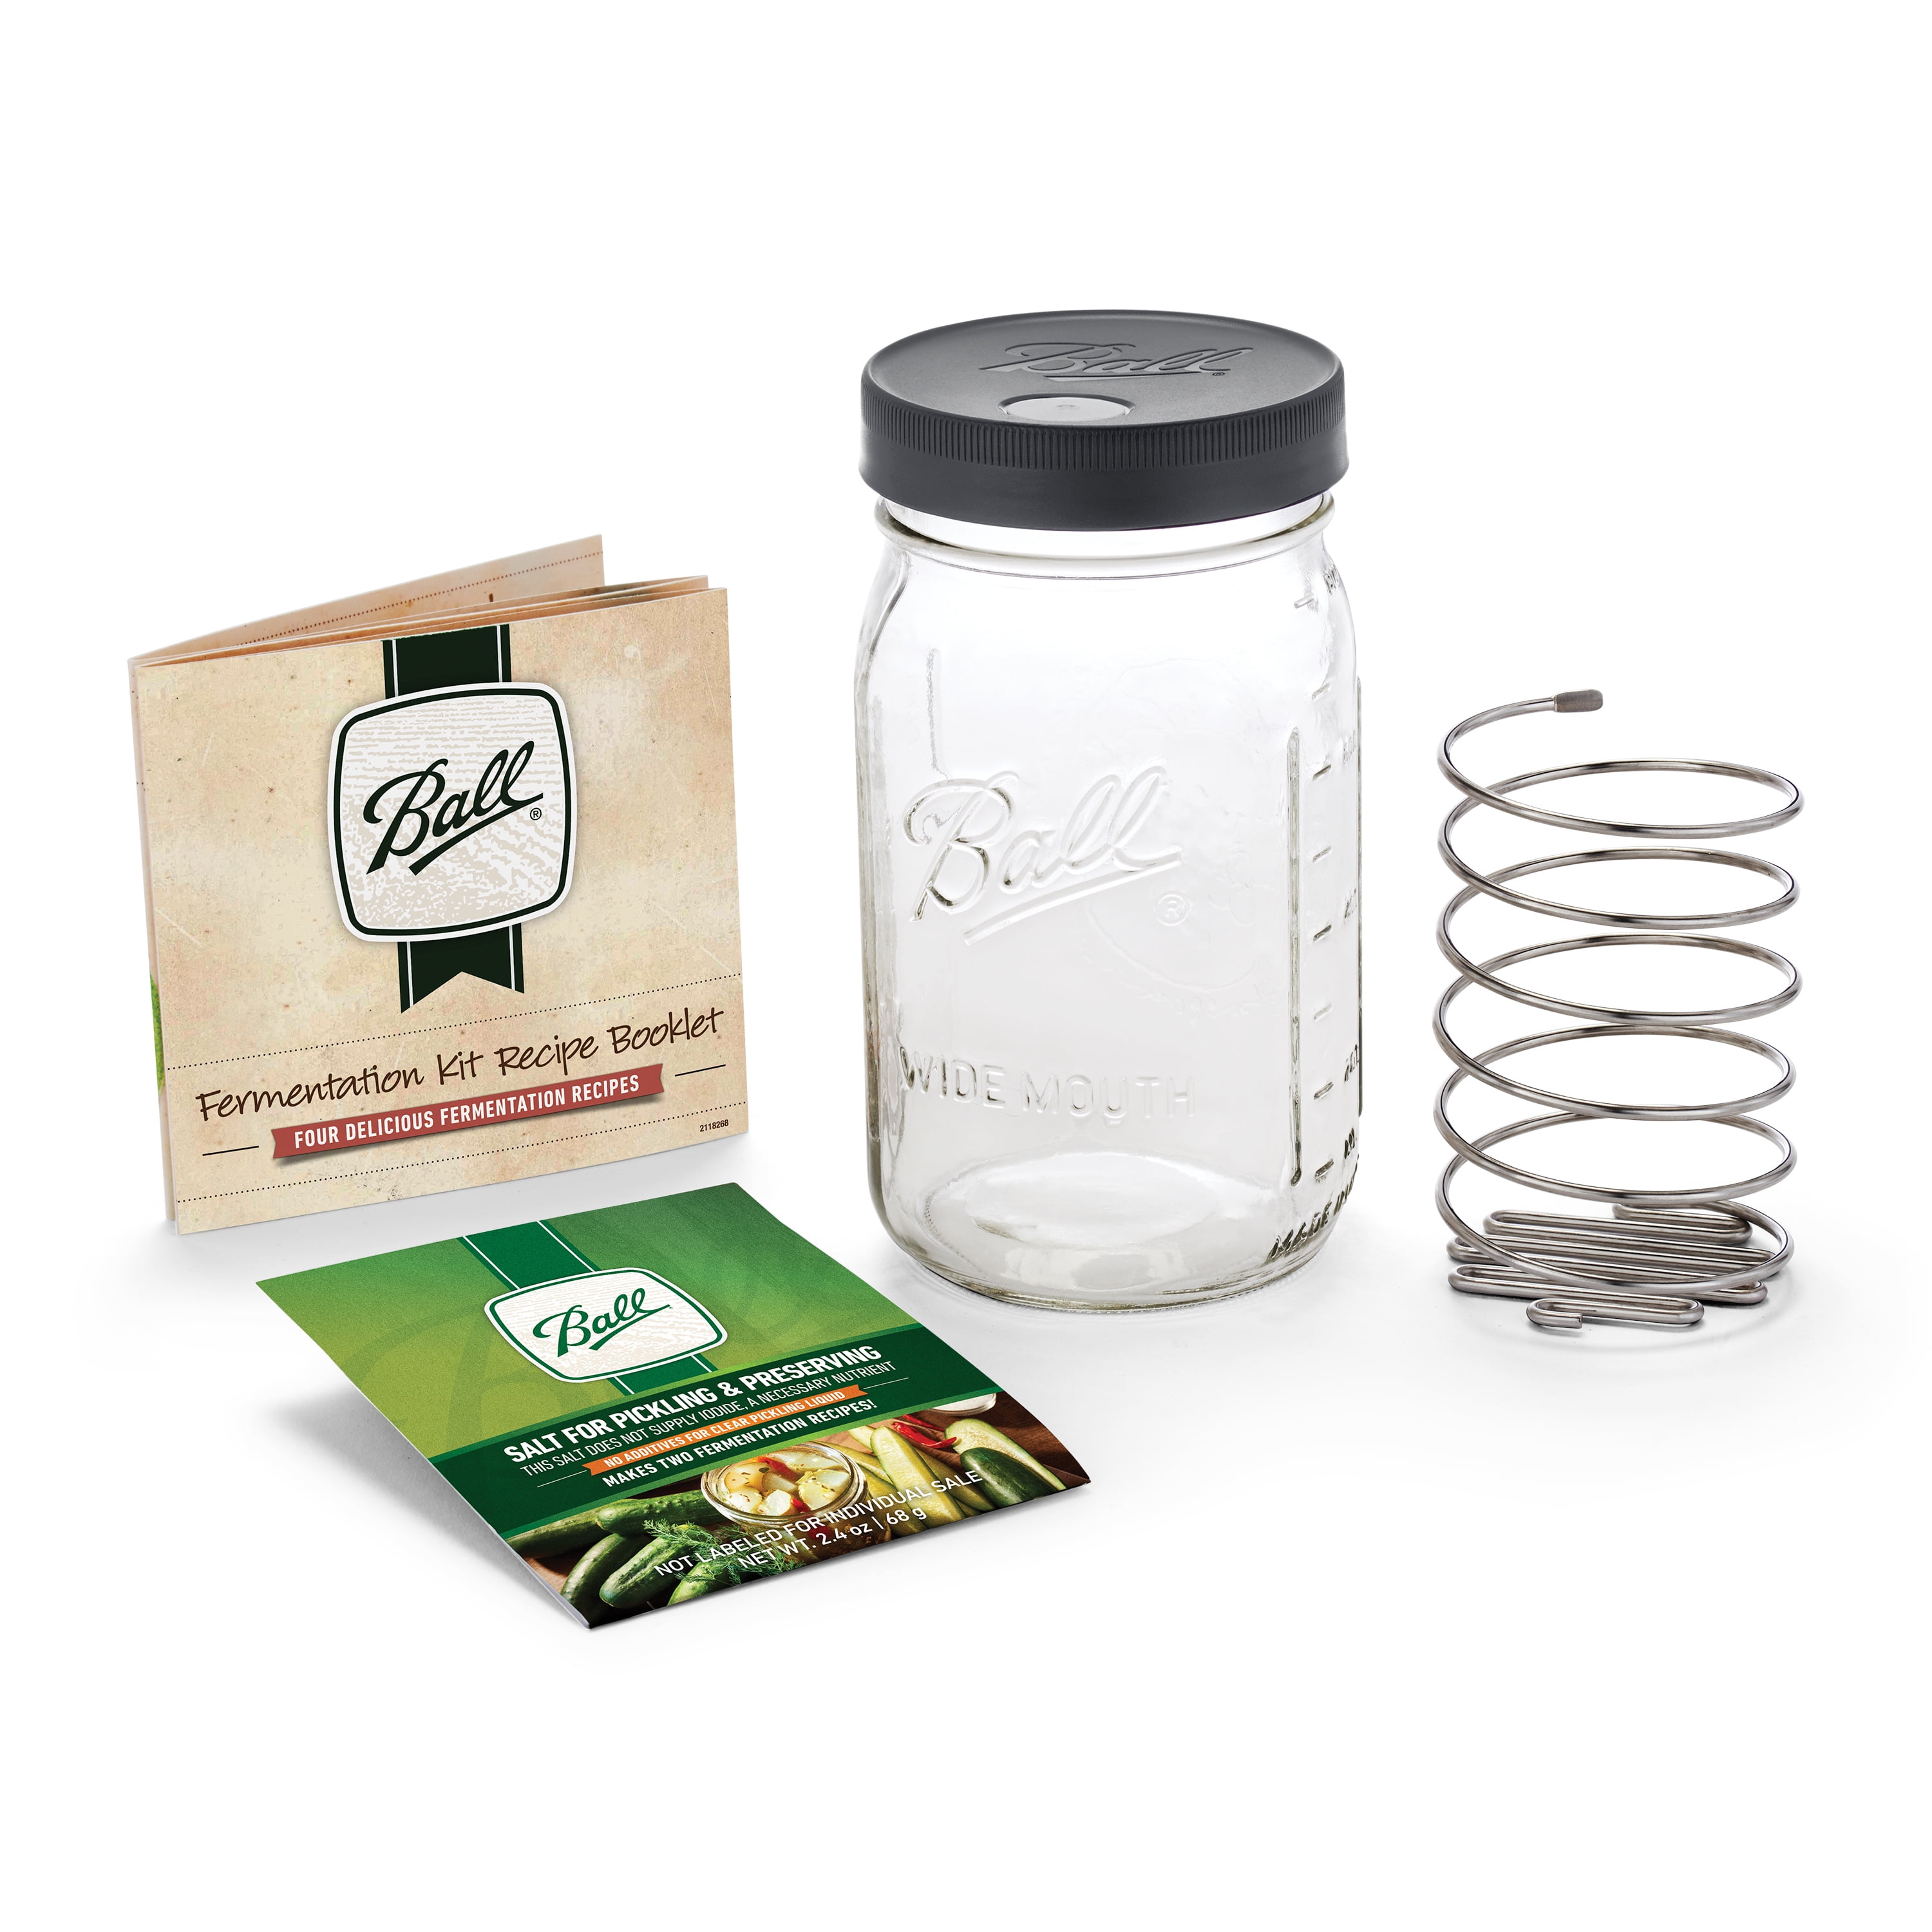 Red Roots & Branches Home Canning Funnel Improved. Fits Wide Mouth & Regular Mason Jars 